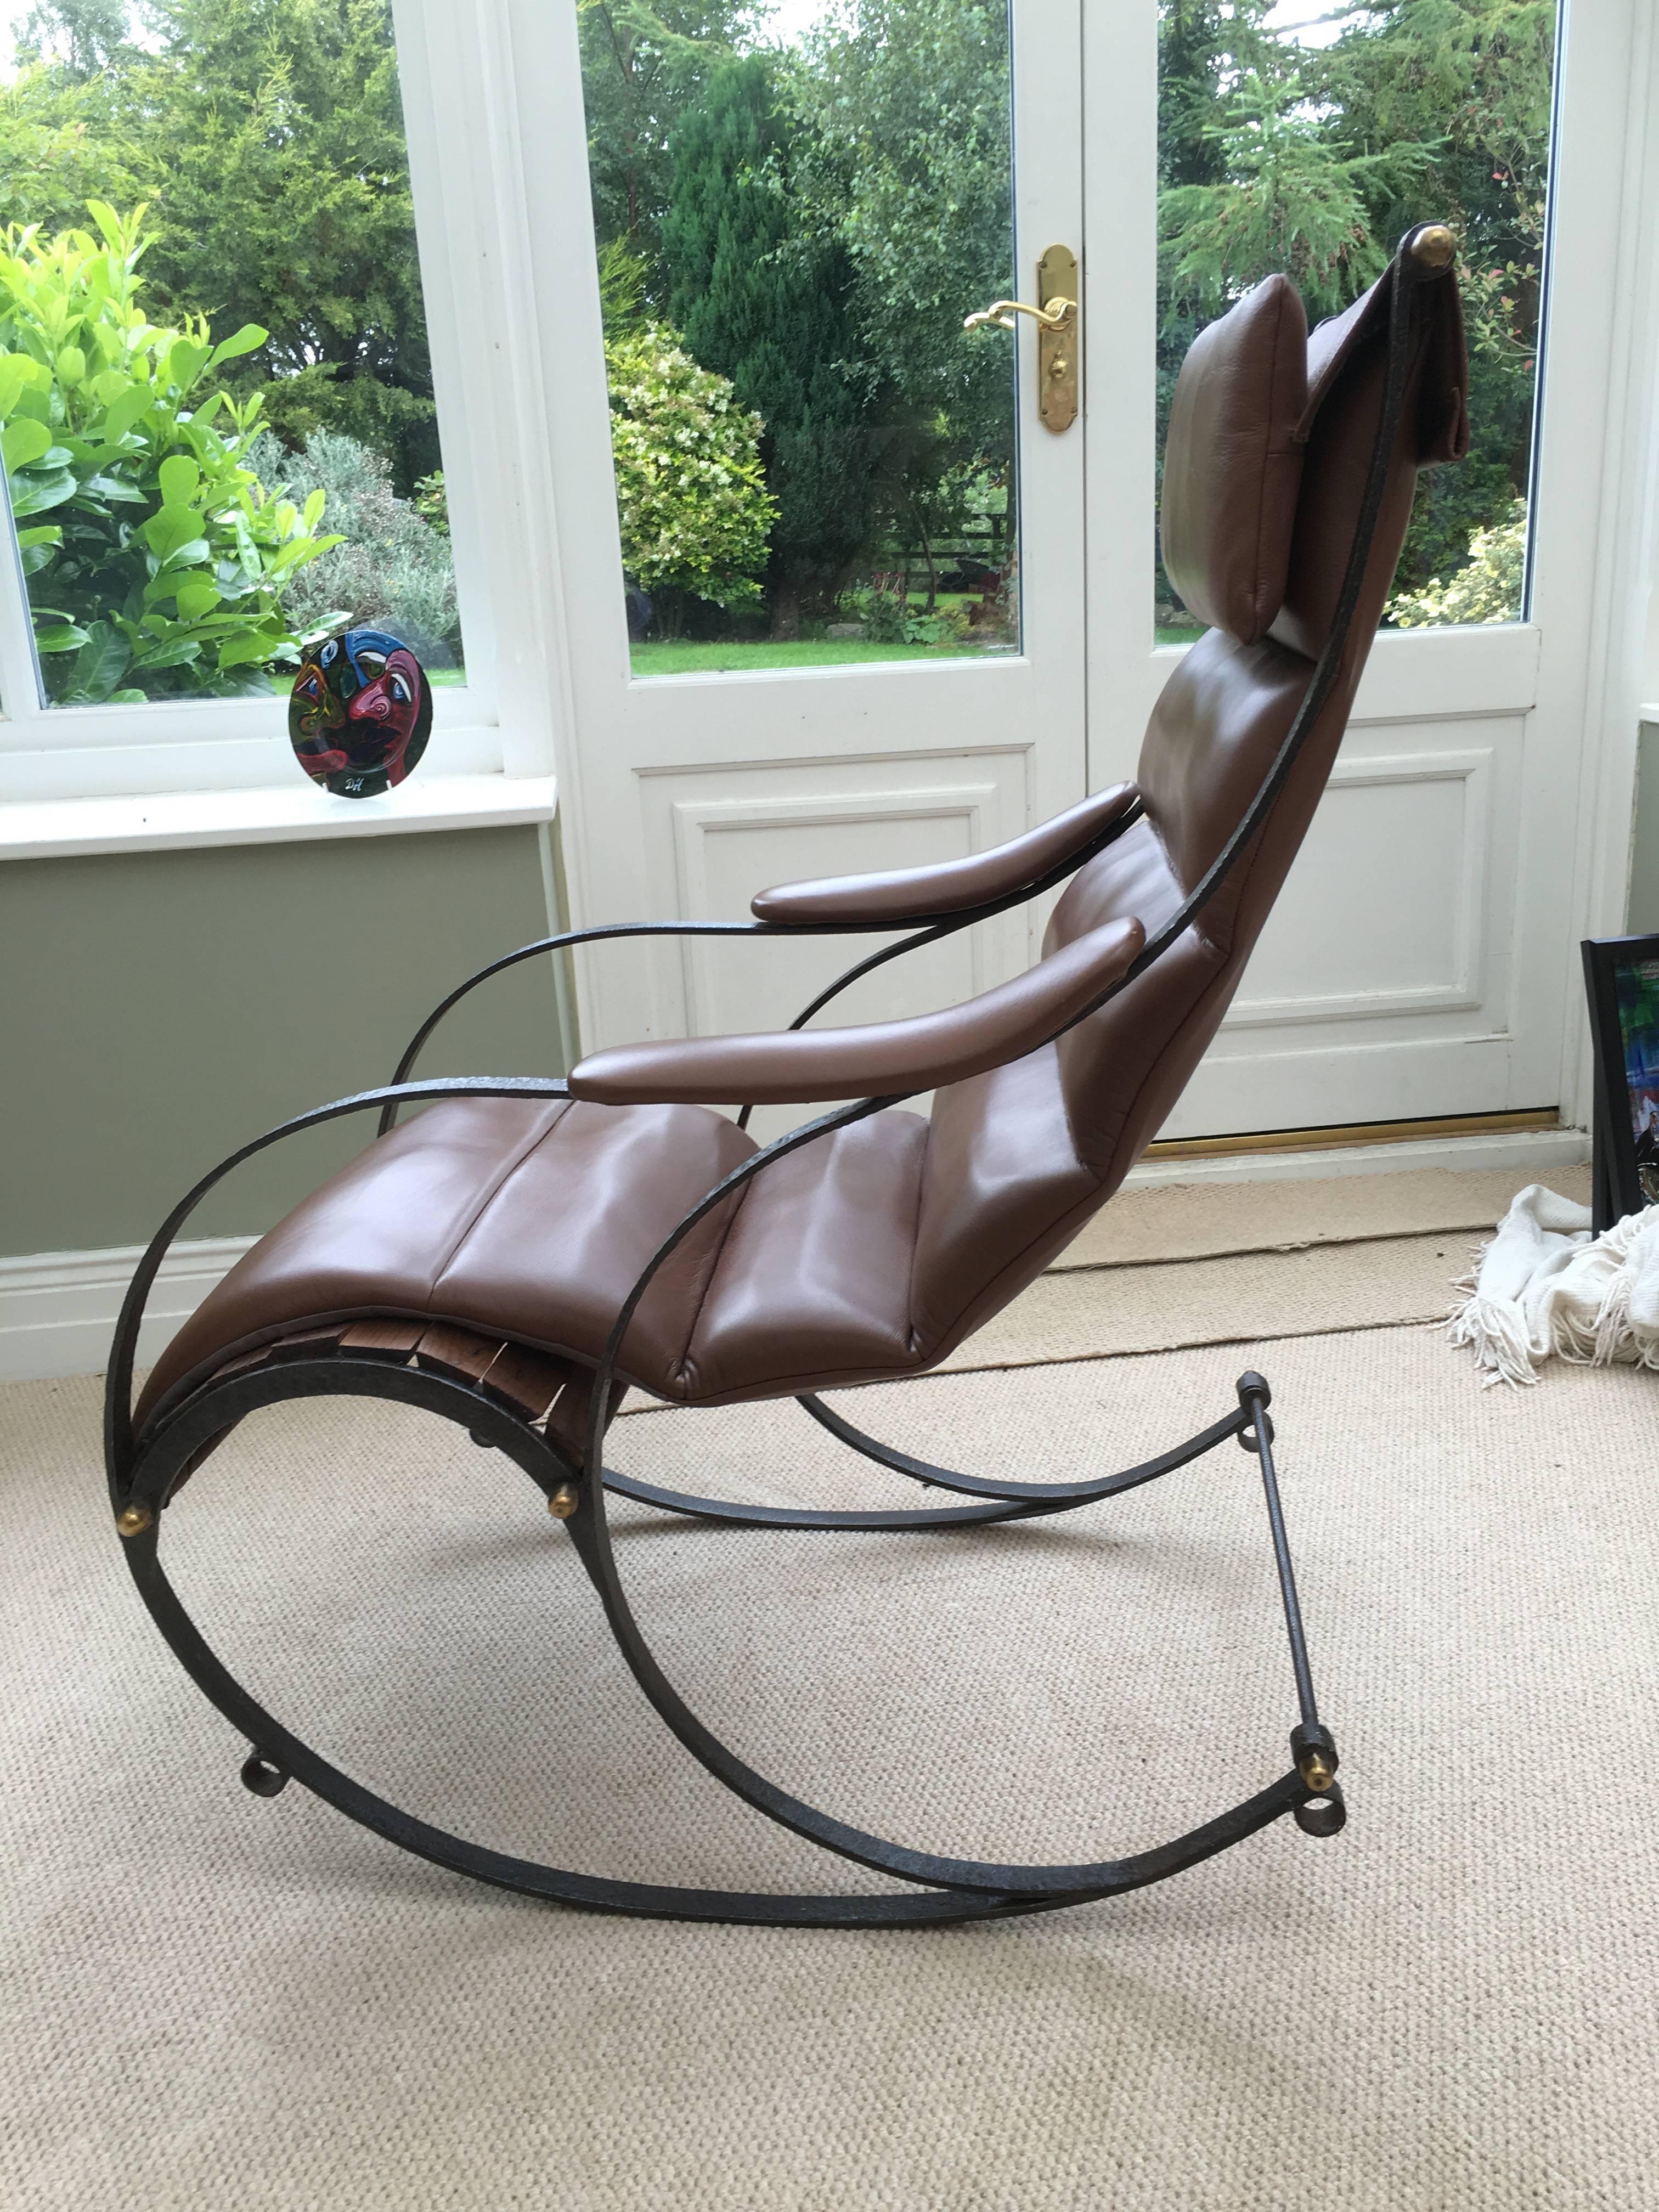 A stunning 19th century steel and leather rocking chair, designed by the company RW Winfield of Birmingham, England

Fully restored around a year ago by my client and at great expense n a super quality brown leather

A period chair in wonderful